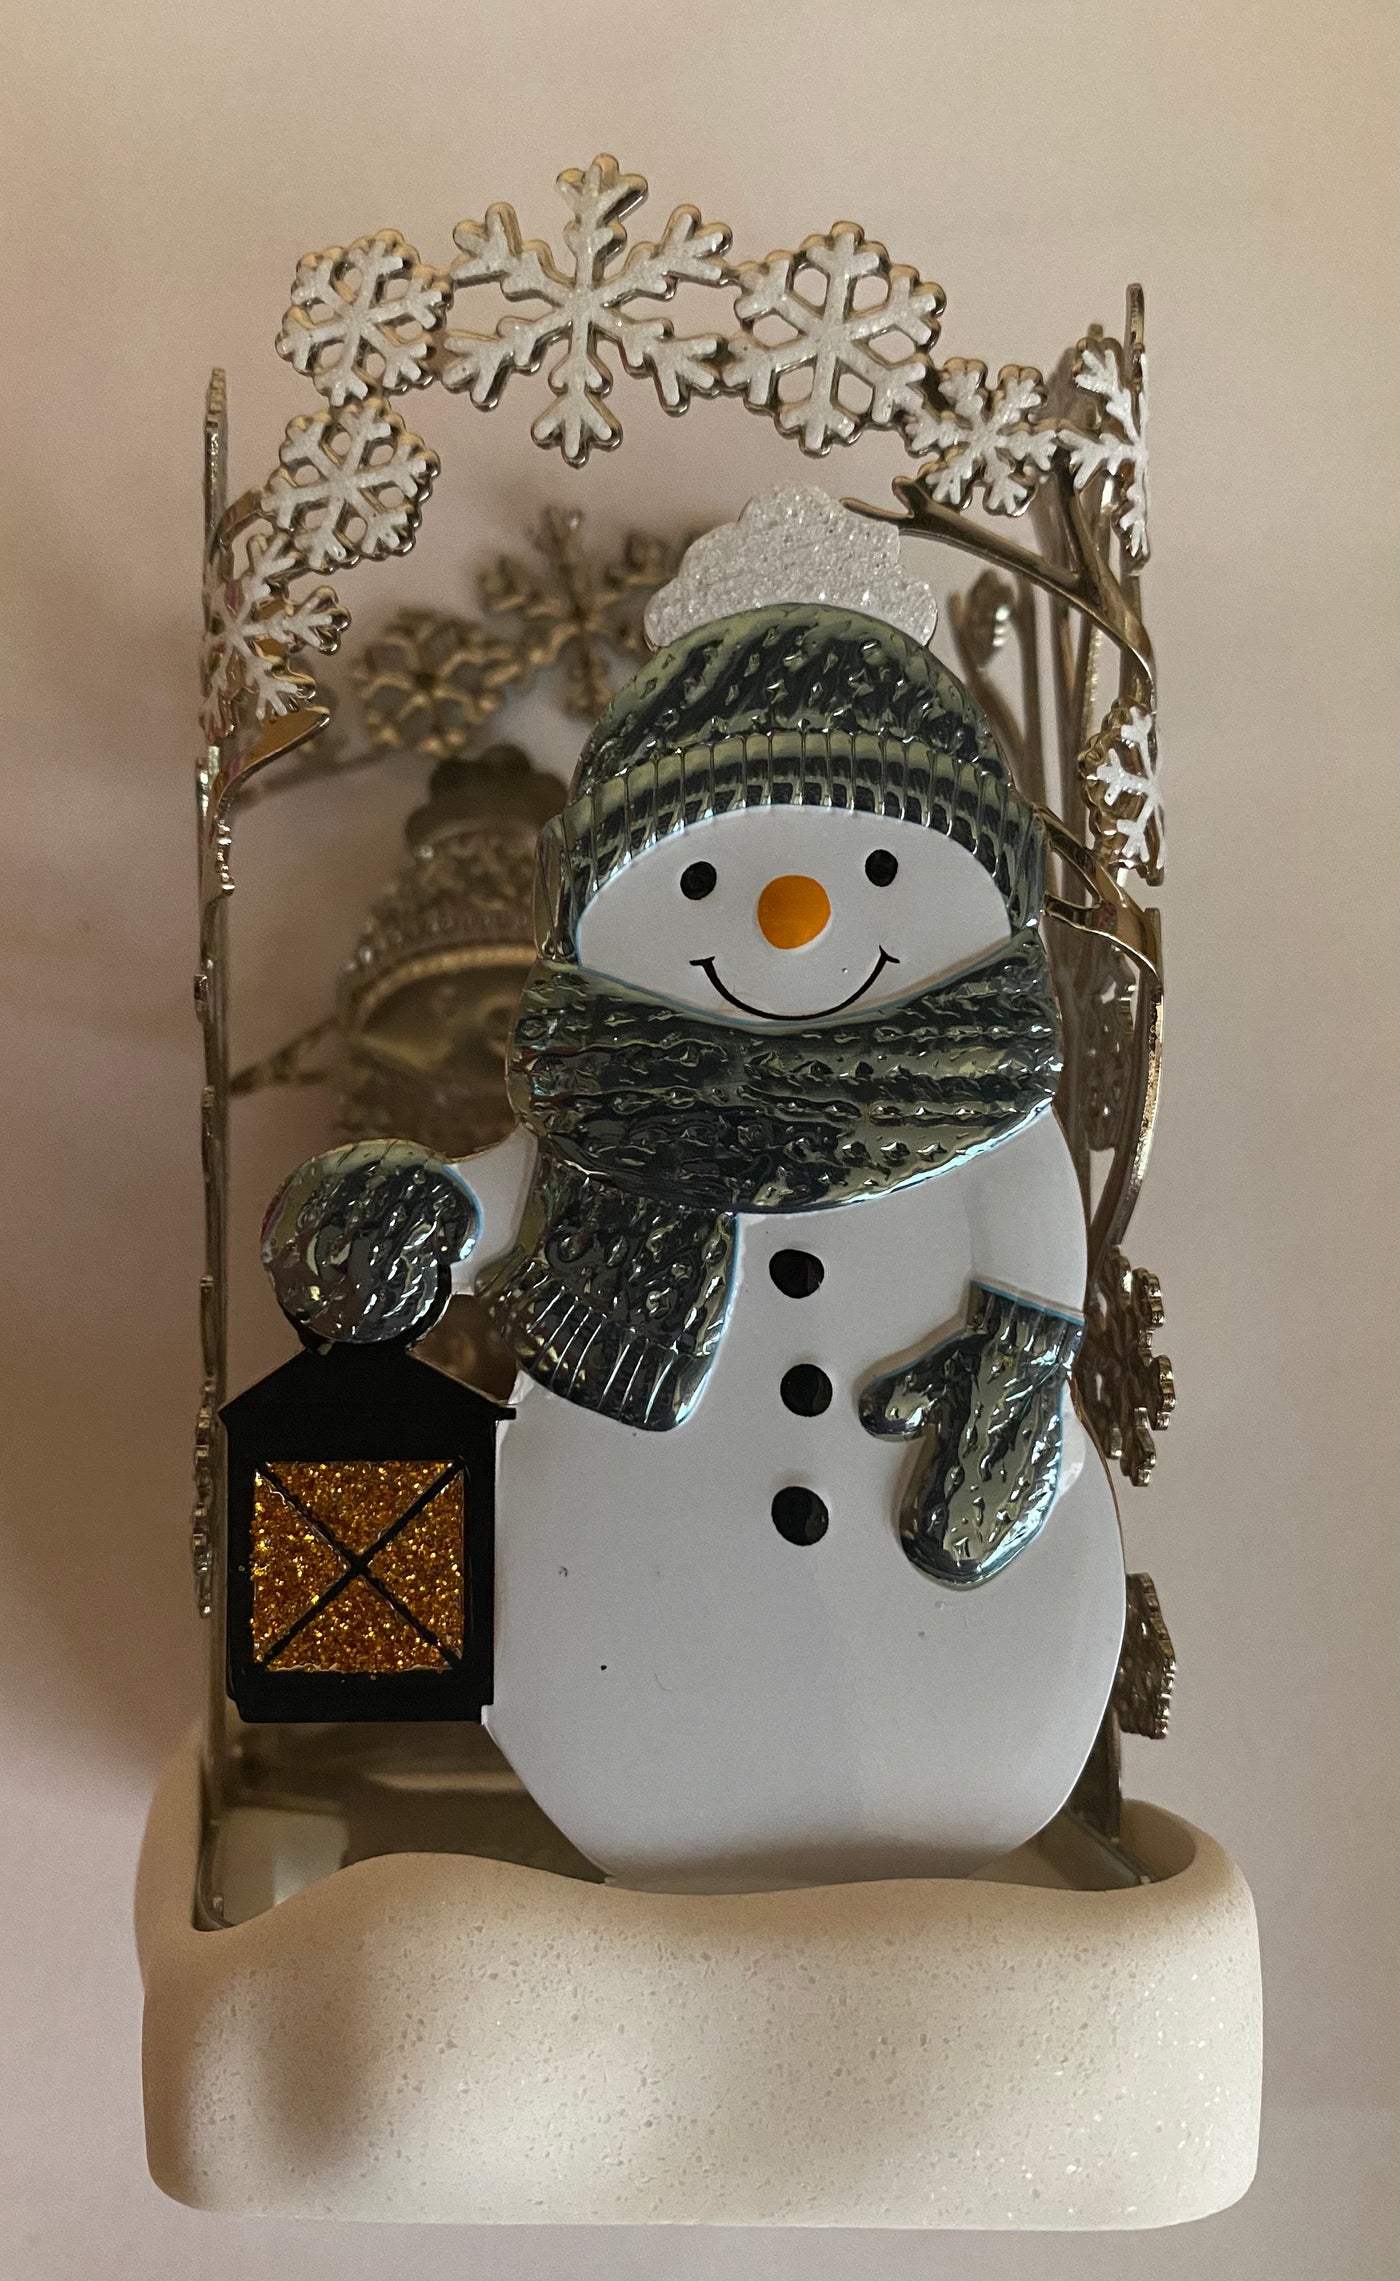 Bath and Body Works Christmas Holiday Snowman Metal Foaming Soap Holder New